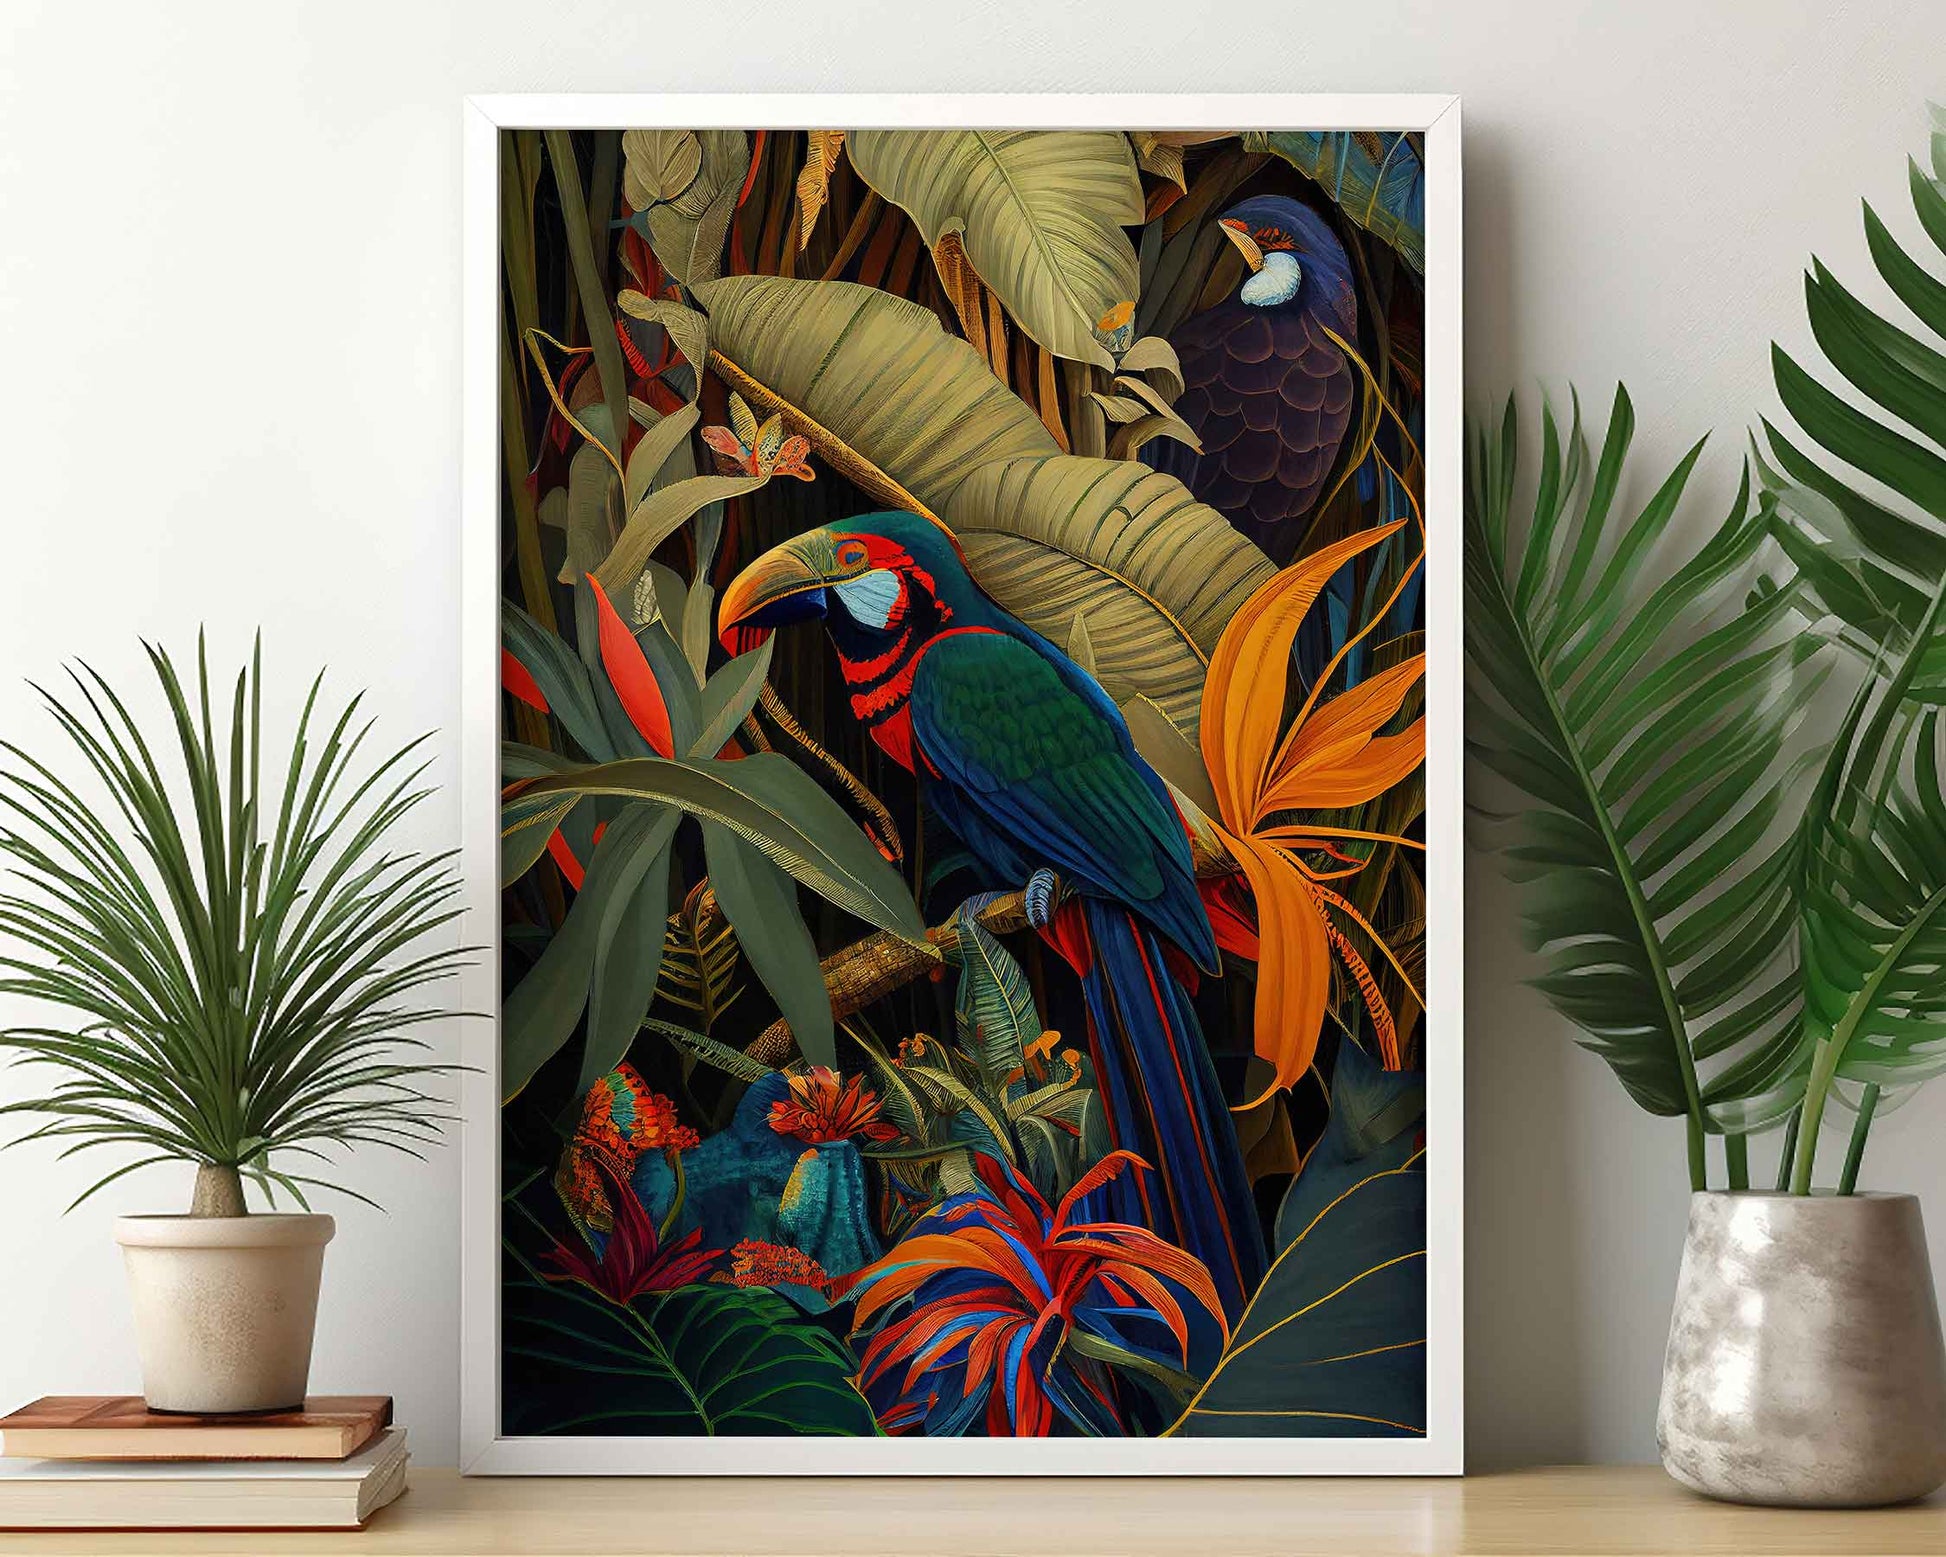 Framed Image of Botanical Jungle Wall Art, Maximalist Style Oil Painting Prints